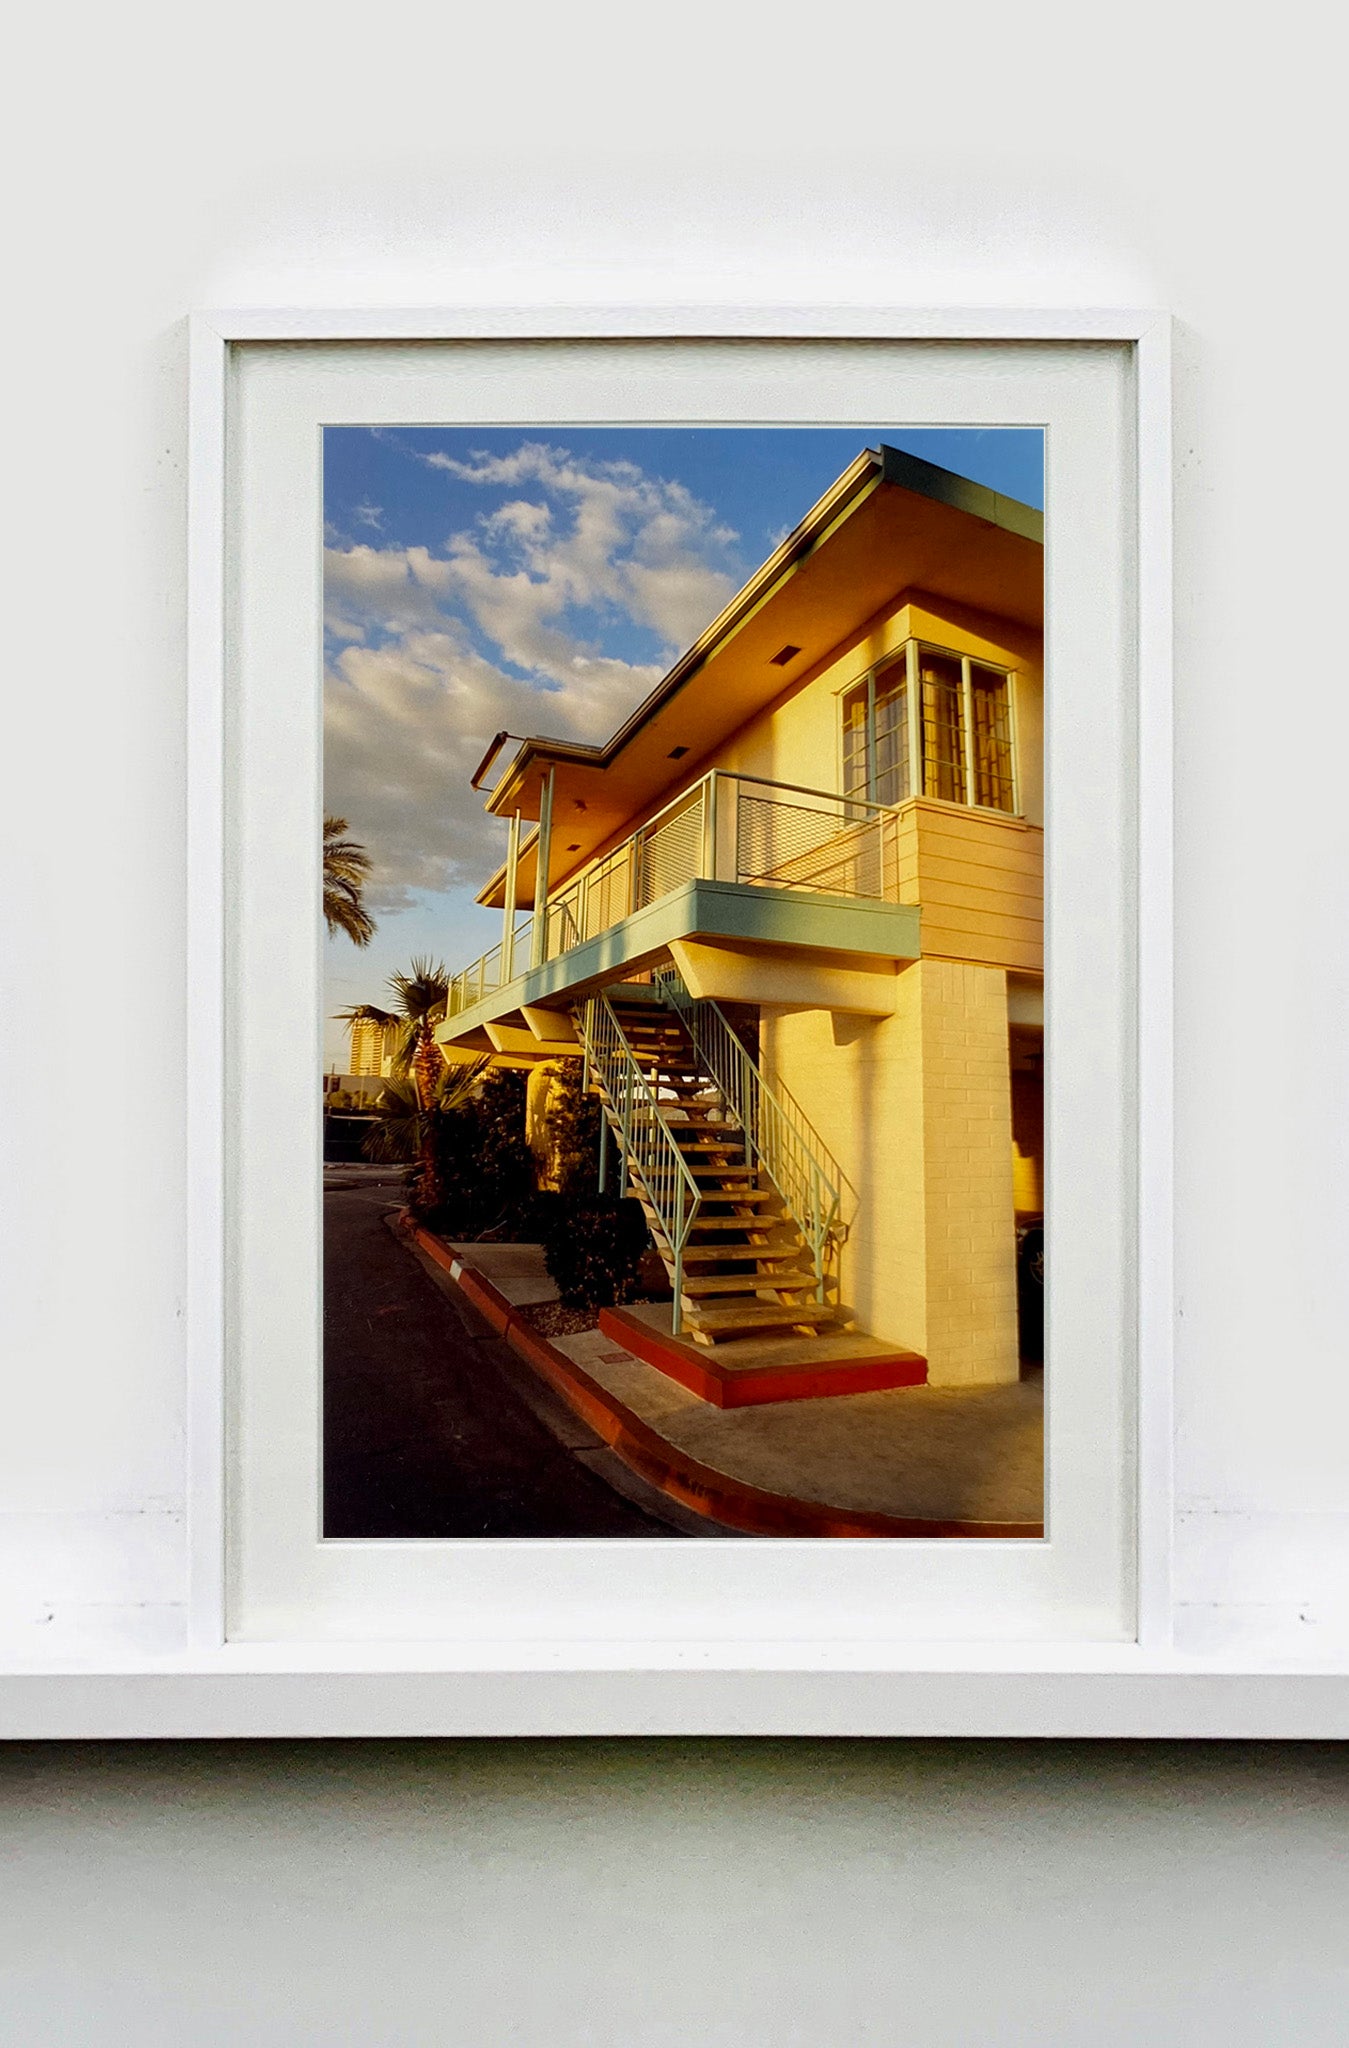 Algiers Motel Apartments, which demonstrates Las Vegas' authentic mid-century architecture, is sadly now just another example of 'lost Vegas'. It was photographed by Richard Heeps for his 'Dream in Colour' series.